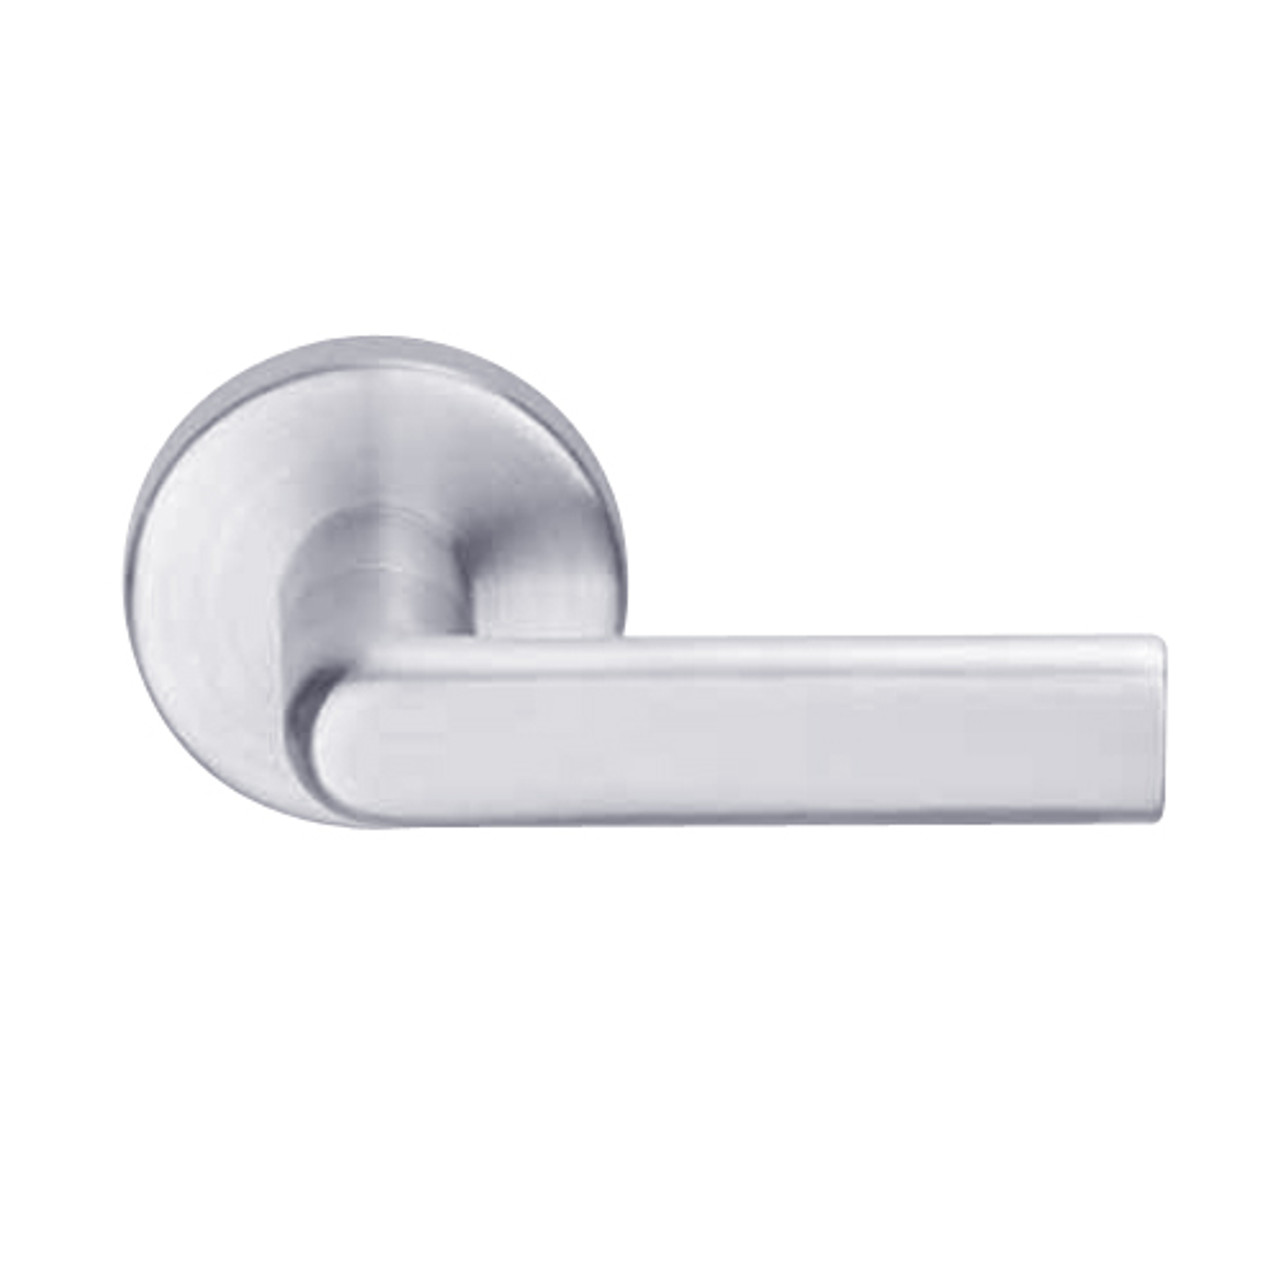 L9486L-01B-626-LH Schlage L Series Less Cylinder Faculty Restroom with Do Not Disturb Indicator Mortise Lock with 01 Cast Lever Design in Satin Chrome